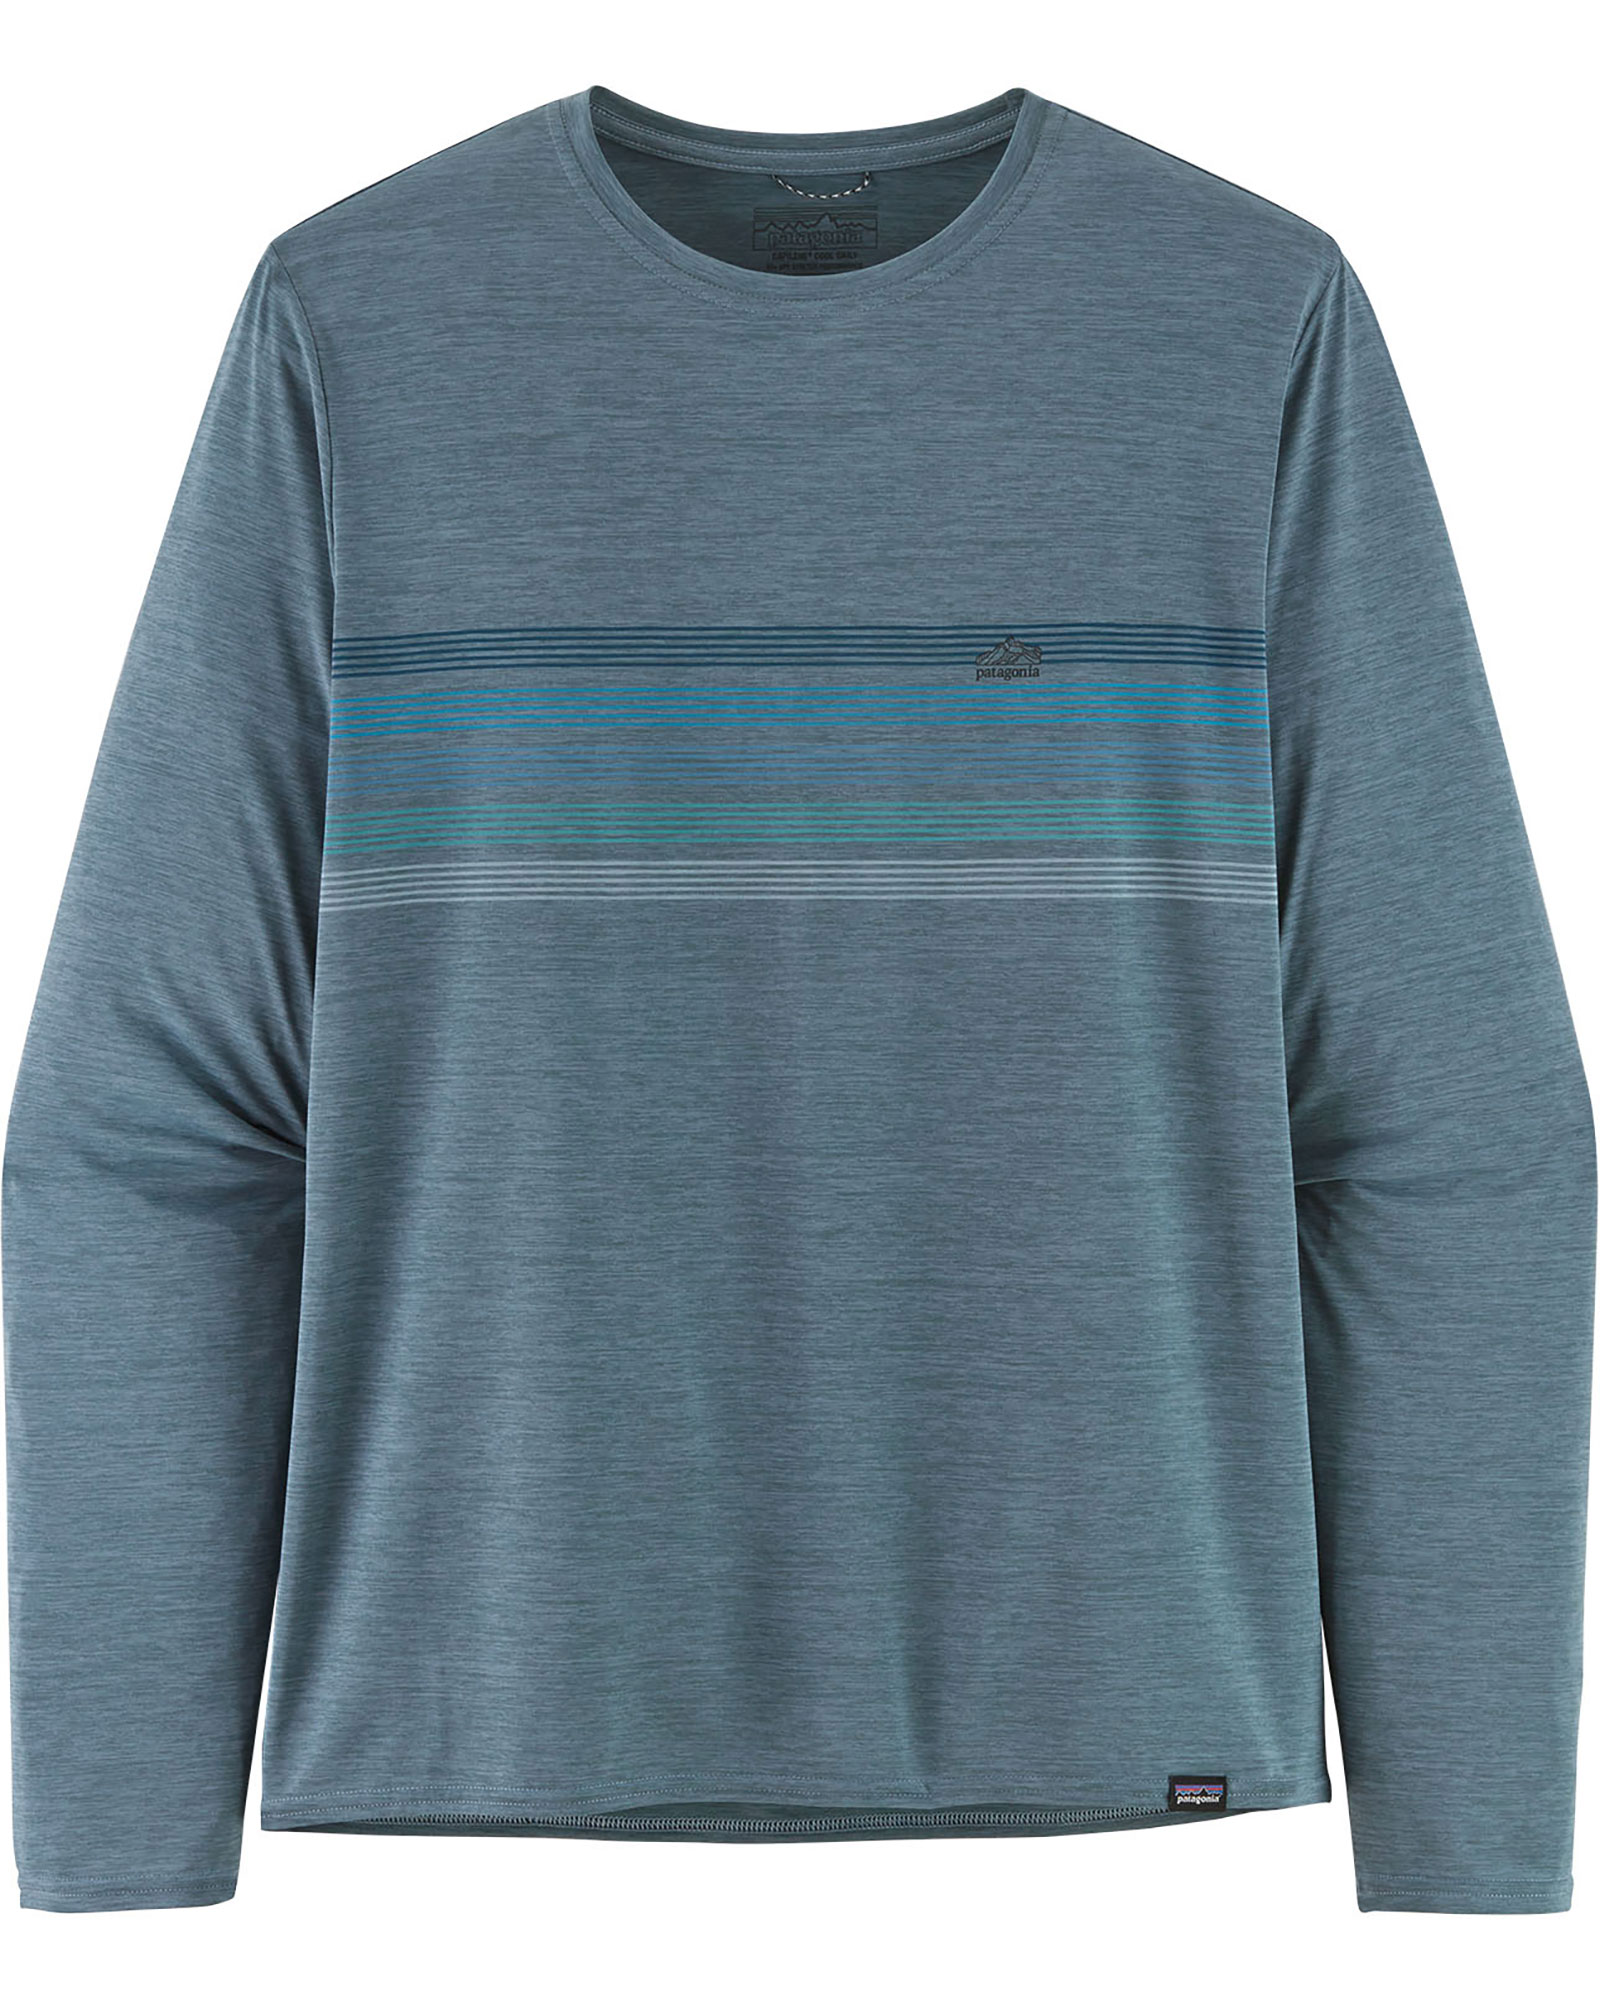 Patagonia Long Sleeve Cap Cool Daily Graphic Men’s T Shirt - Light Plume Grey/ Line Logo S